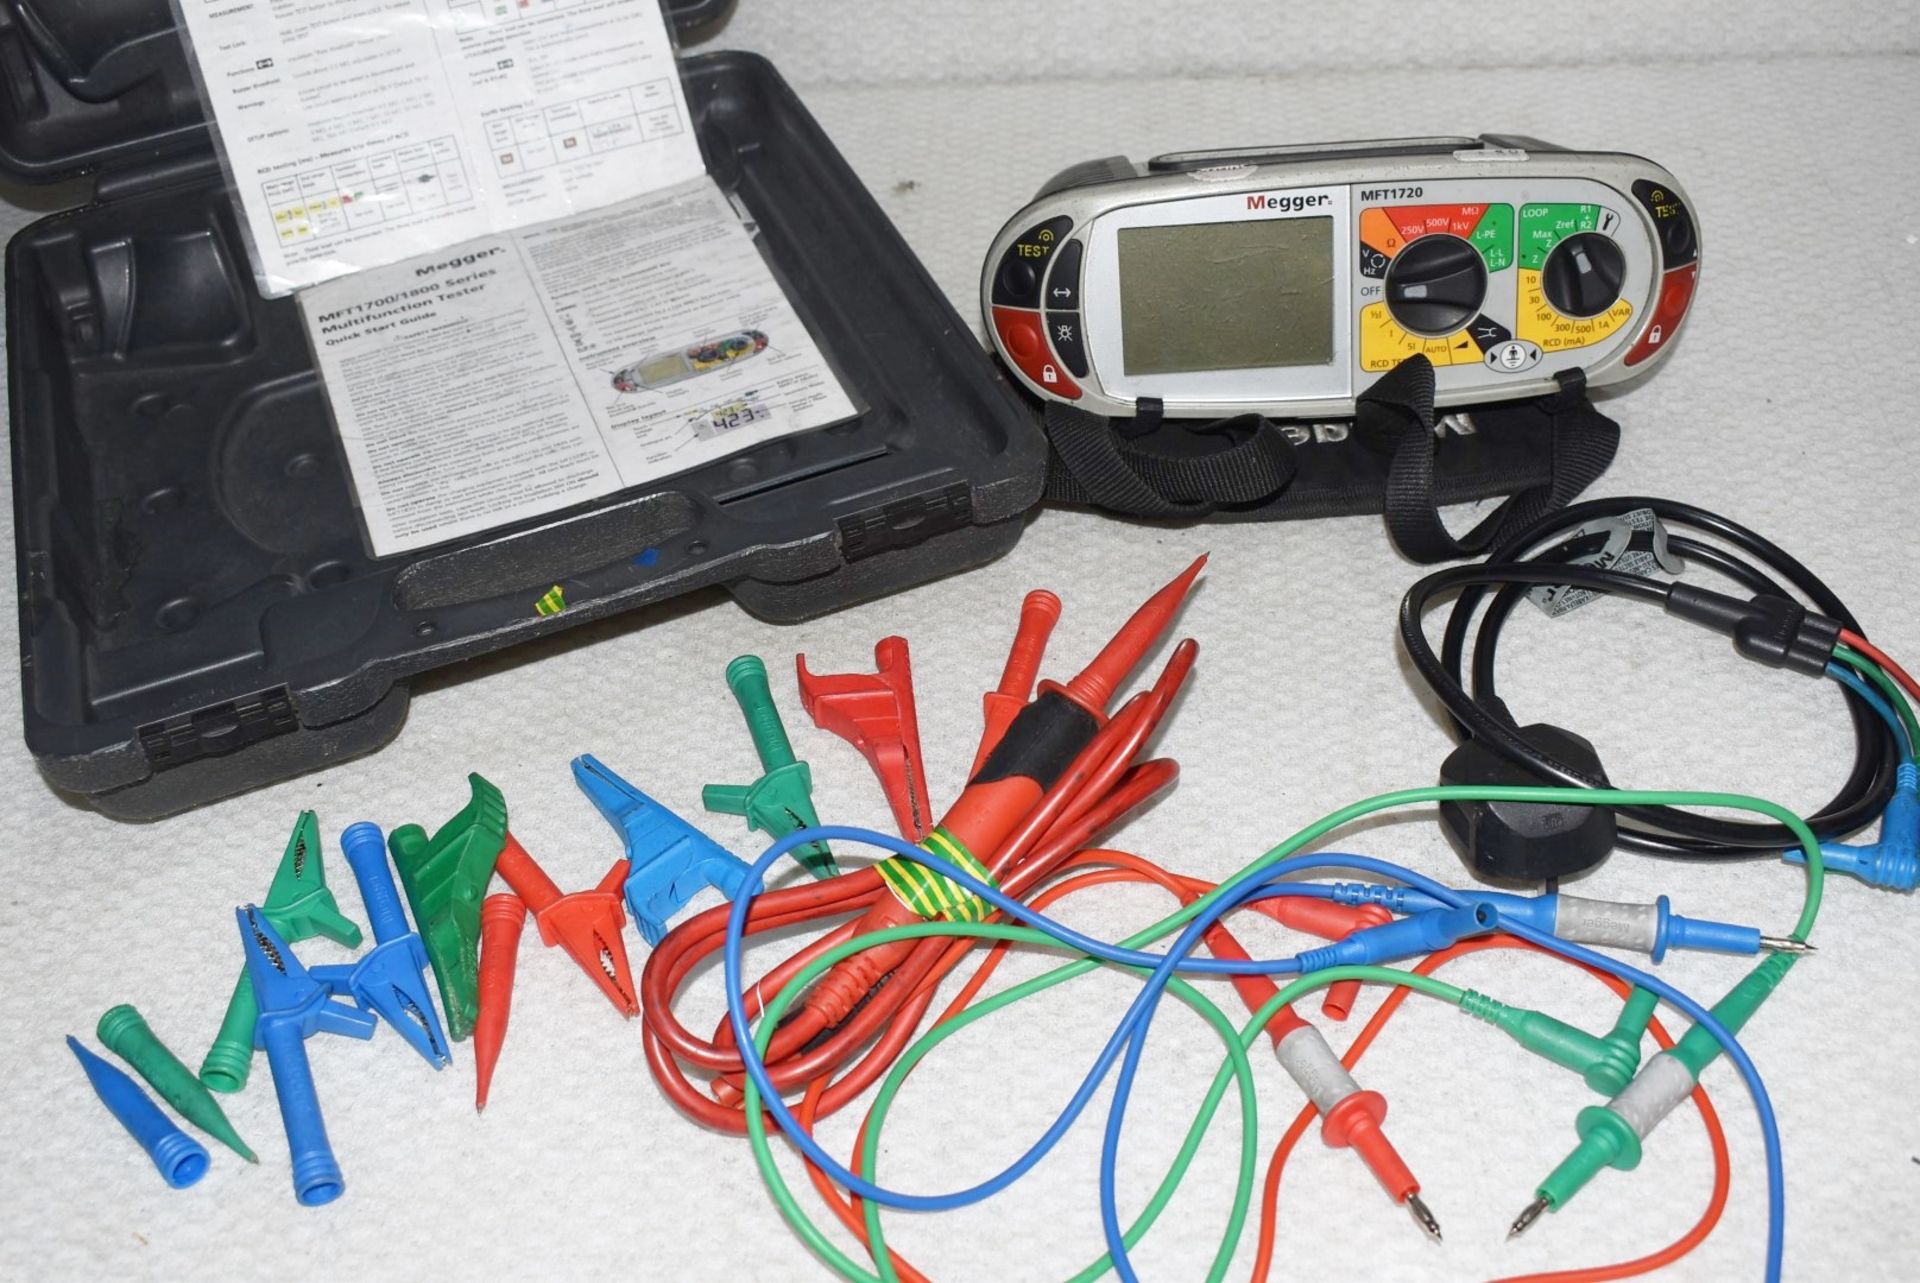 1 x MEGGER MFT1720 Multifunction Tester With Auto 3-phase RCD Testing - Includes Carry Case -